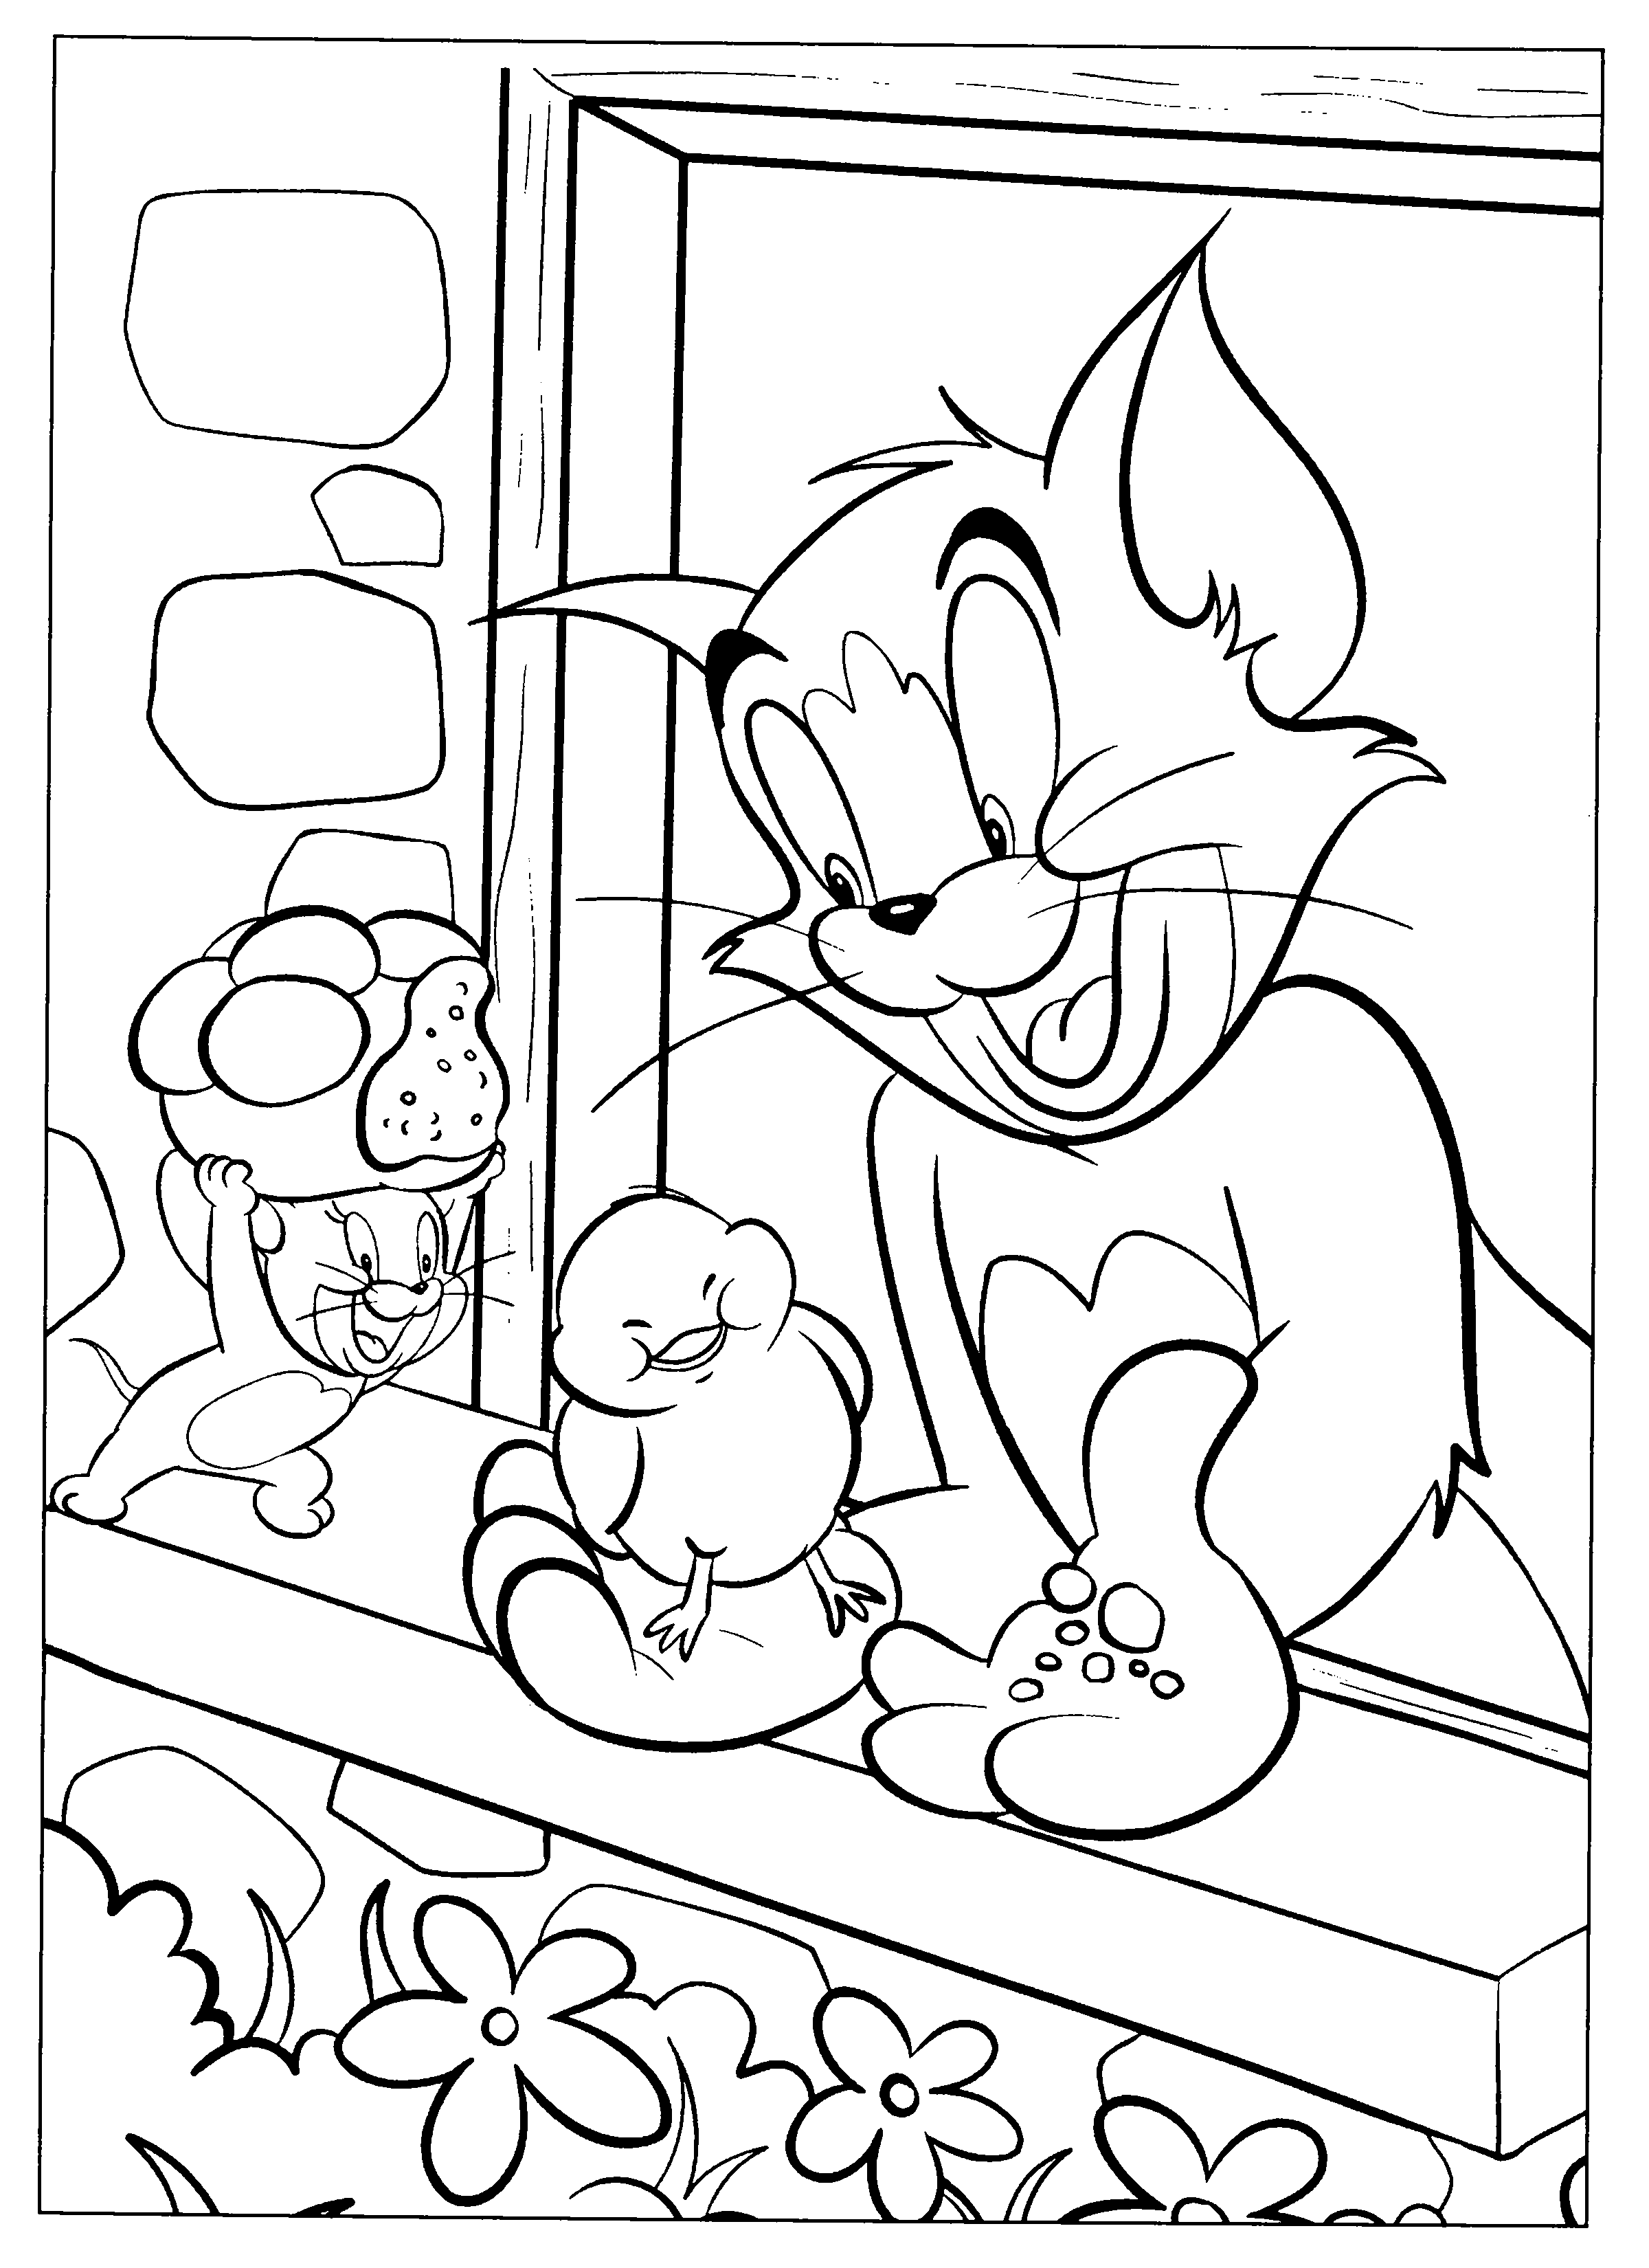 Coloring Page - Tom and jerry coloring pages 13